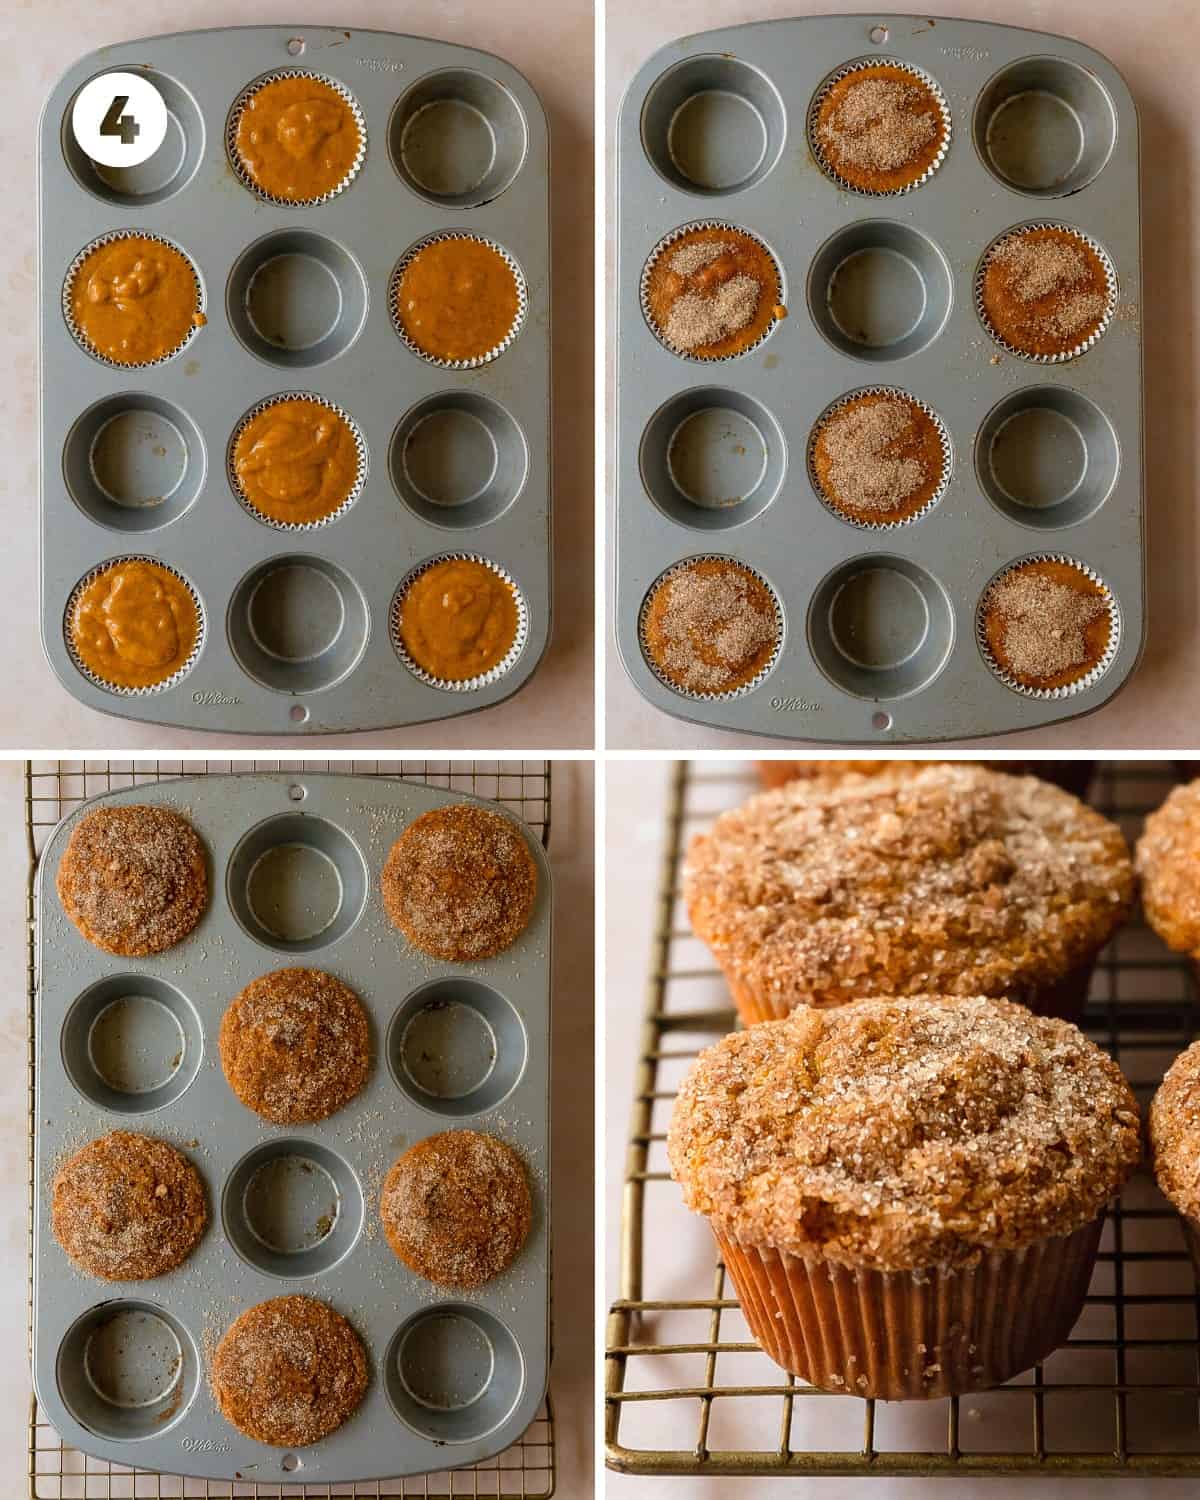 In mixing bowl, whisk the granulated sugar and ground cinnamon until well combined. Line (2) 12 ct. muffin pans with cupcake liners. Use a 3 tablespoon sized cookie scoop to scoop the muffin batter into each of the muffin liners, alternating every other cup. Top with the cinnamon sugar. Bake the muffins at 375 F (190 C) for 18 - 22 minutes. The muffins are done when a toothpick inserted into the center comes about with a few moist crumbs or when a finger pressed gently into the center of the muffins quickly bounces back. Be careful as the cinnamon sugar will be very hot. Cool the pumpkin muffins in the muffin pan for 5 - 10 minutes. Carefully remove the muffins to cool to room temperature and enjoy!